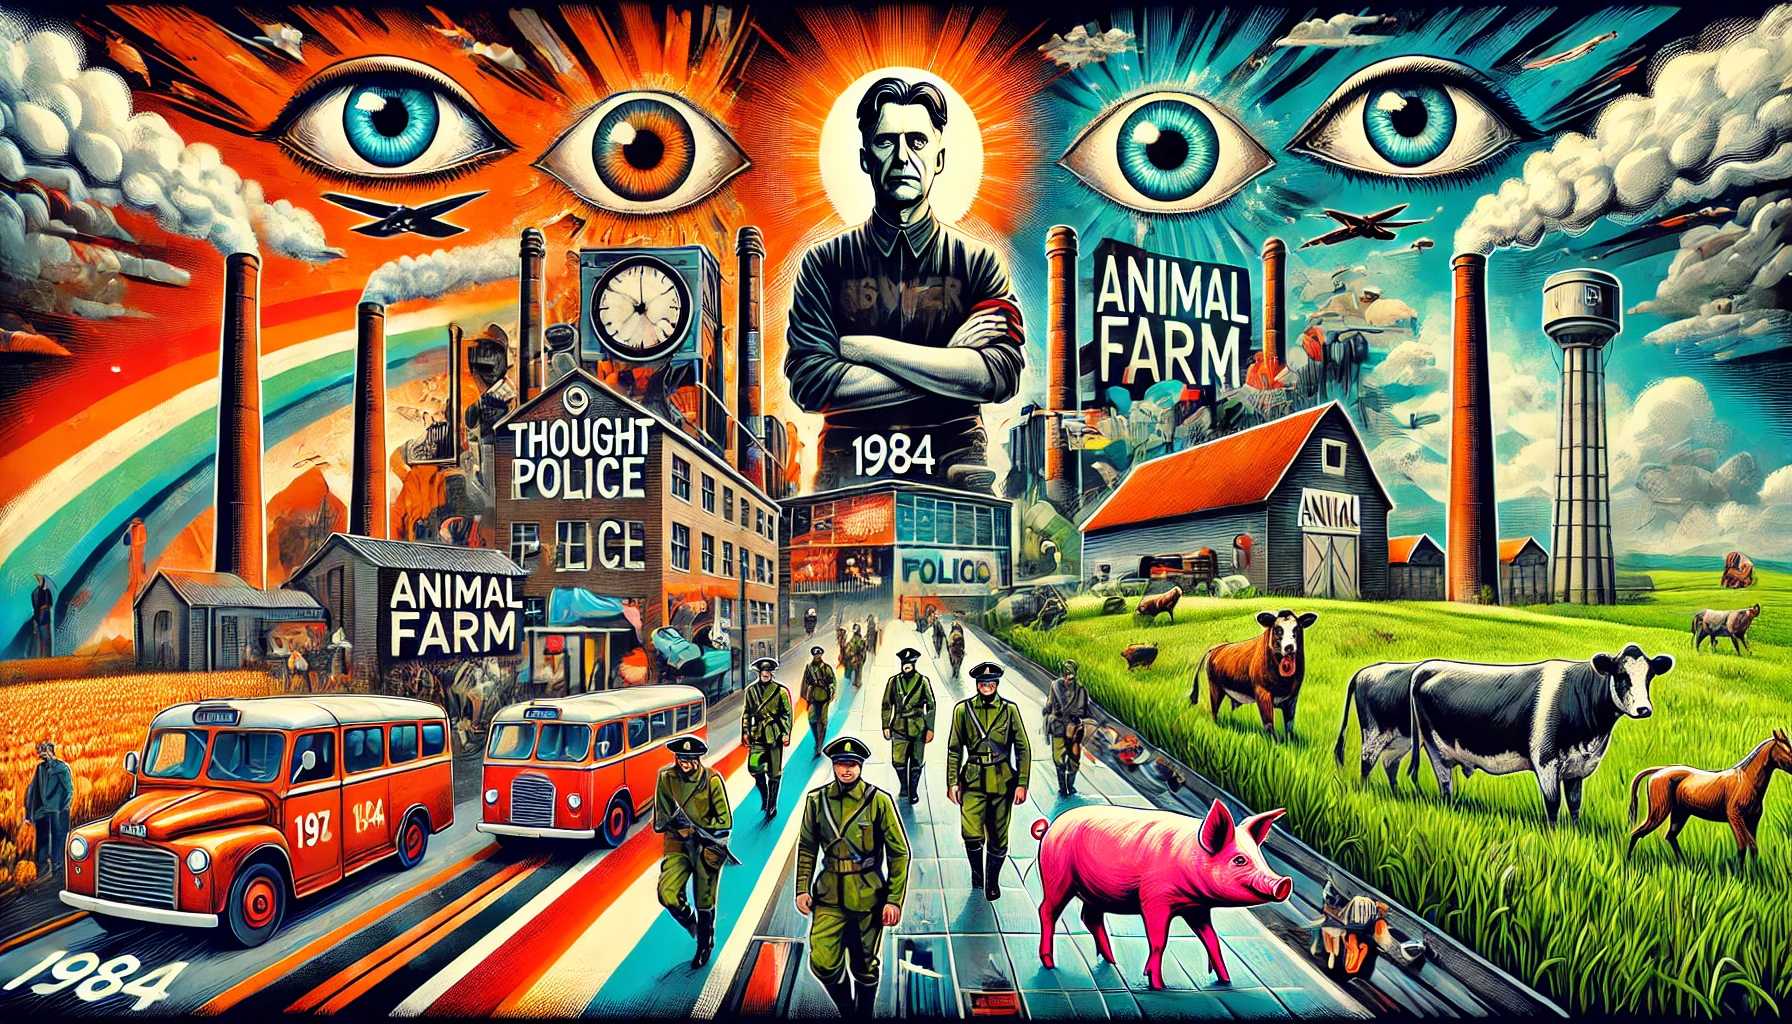 Comparing Dystopian Themes in George Orwell's